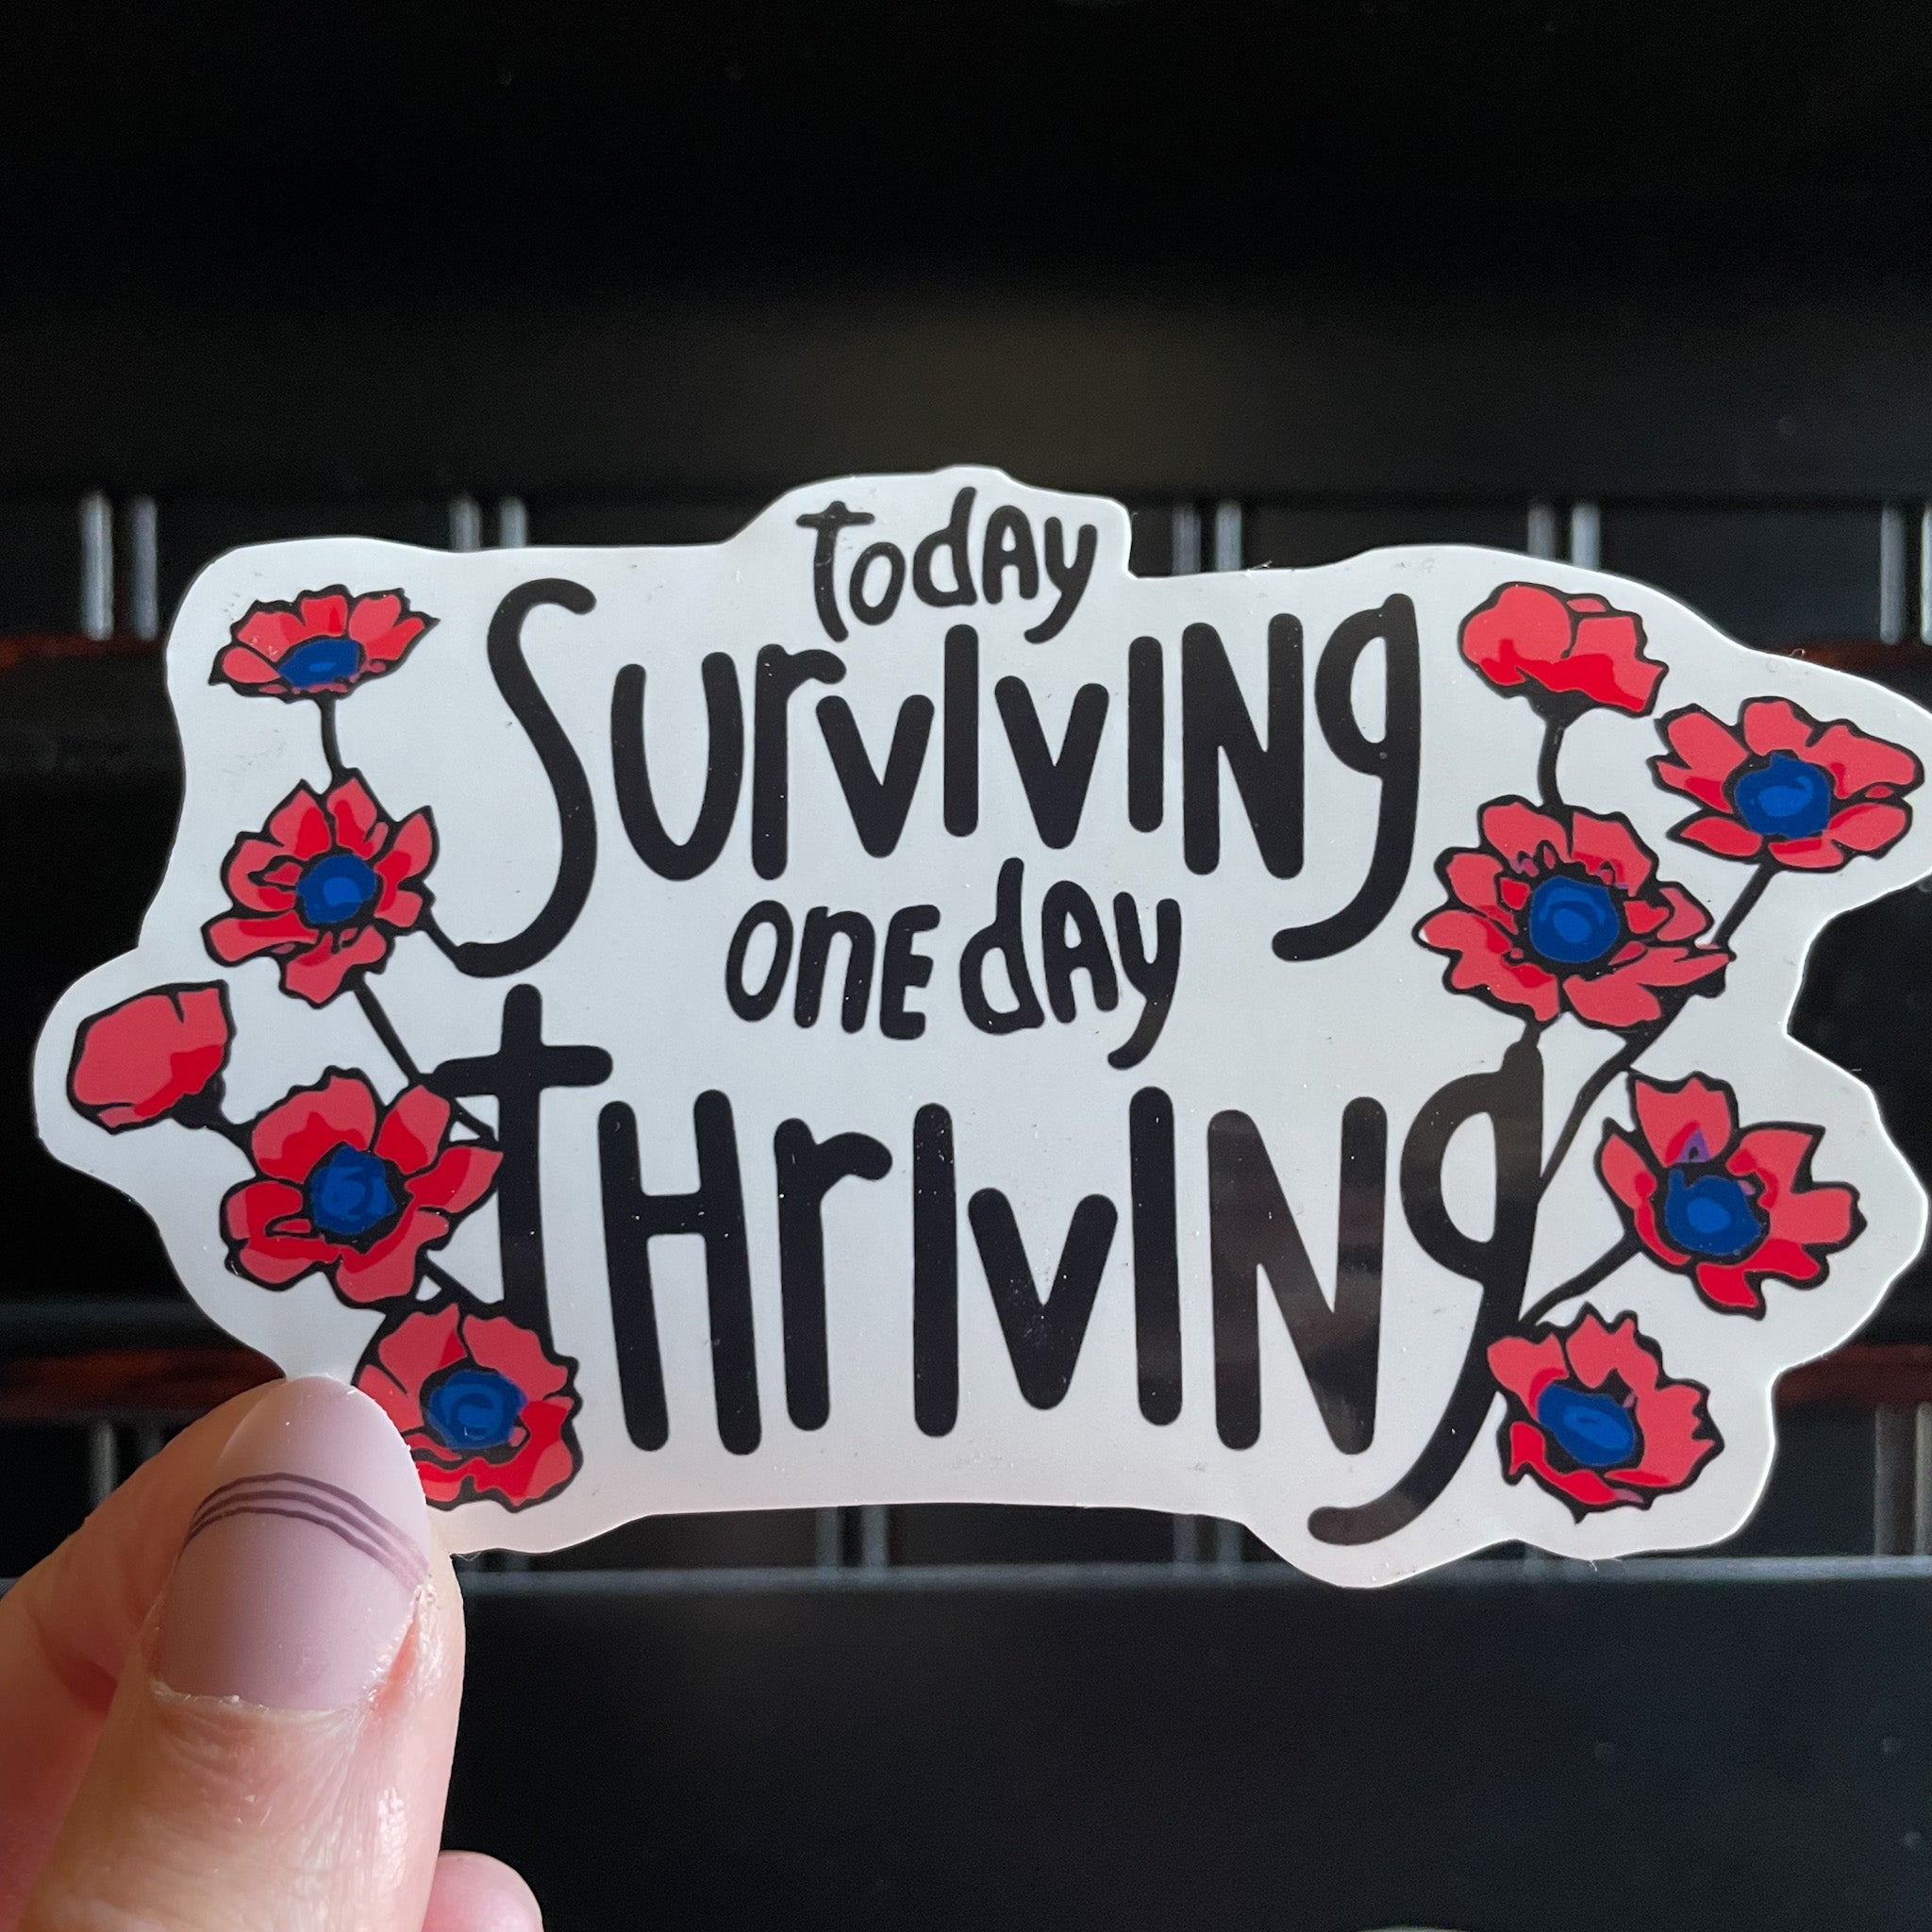 Today Surviving, One Day Thriving Sticker